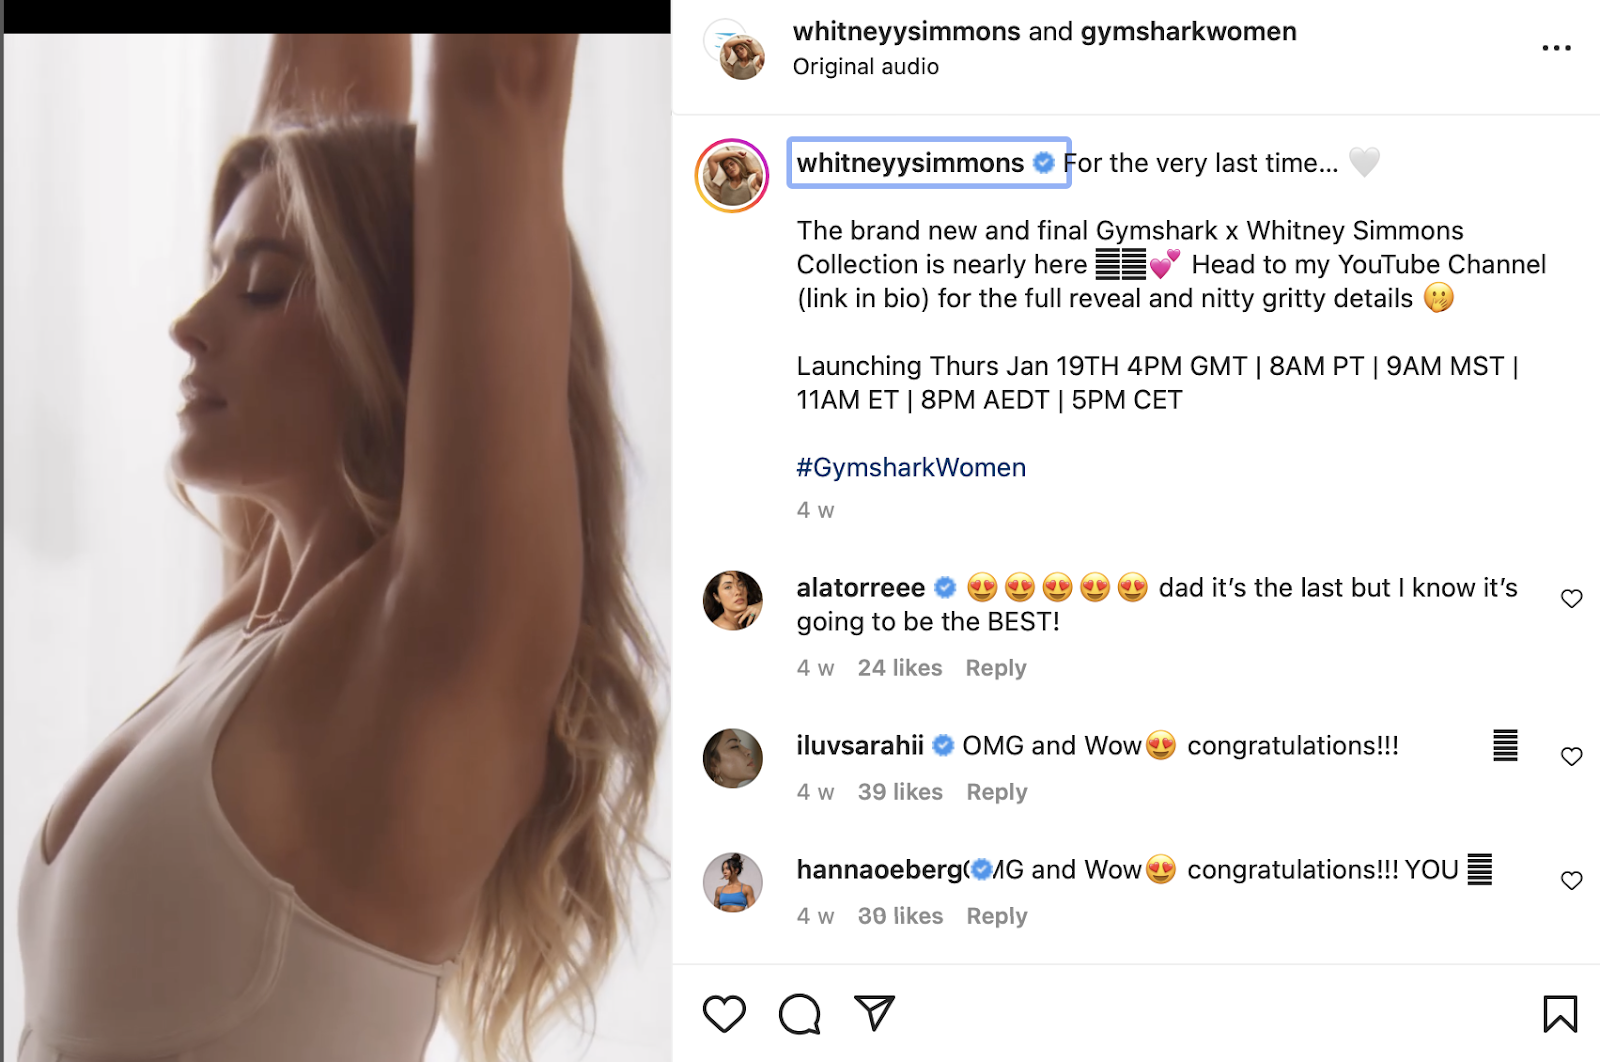 An example of a long-term sponsorship contract for influencers